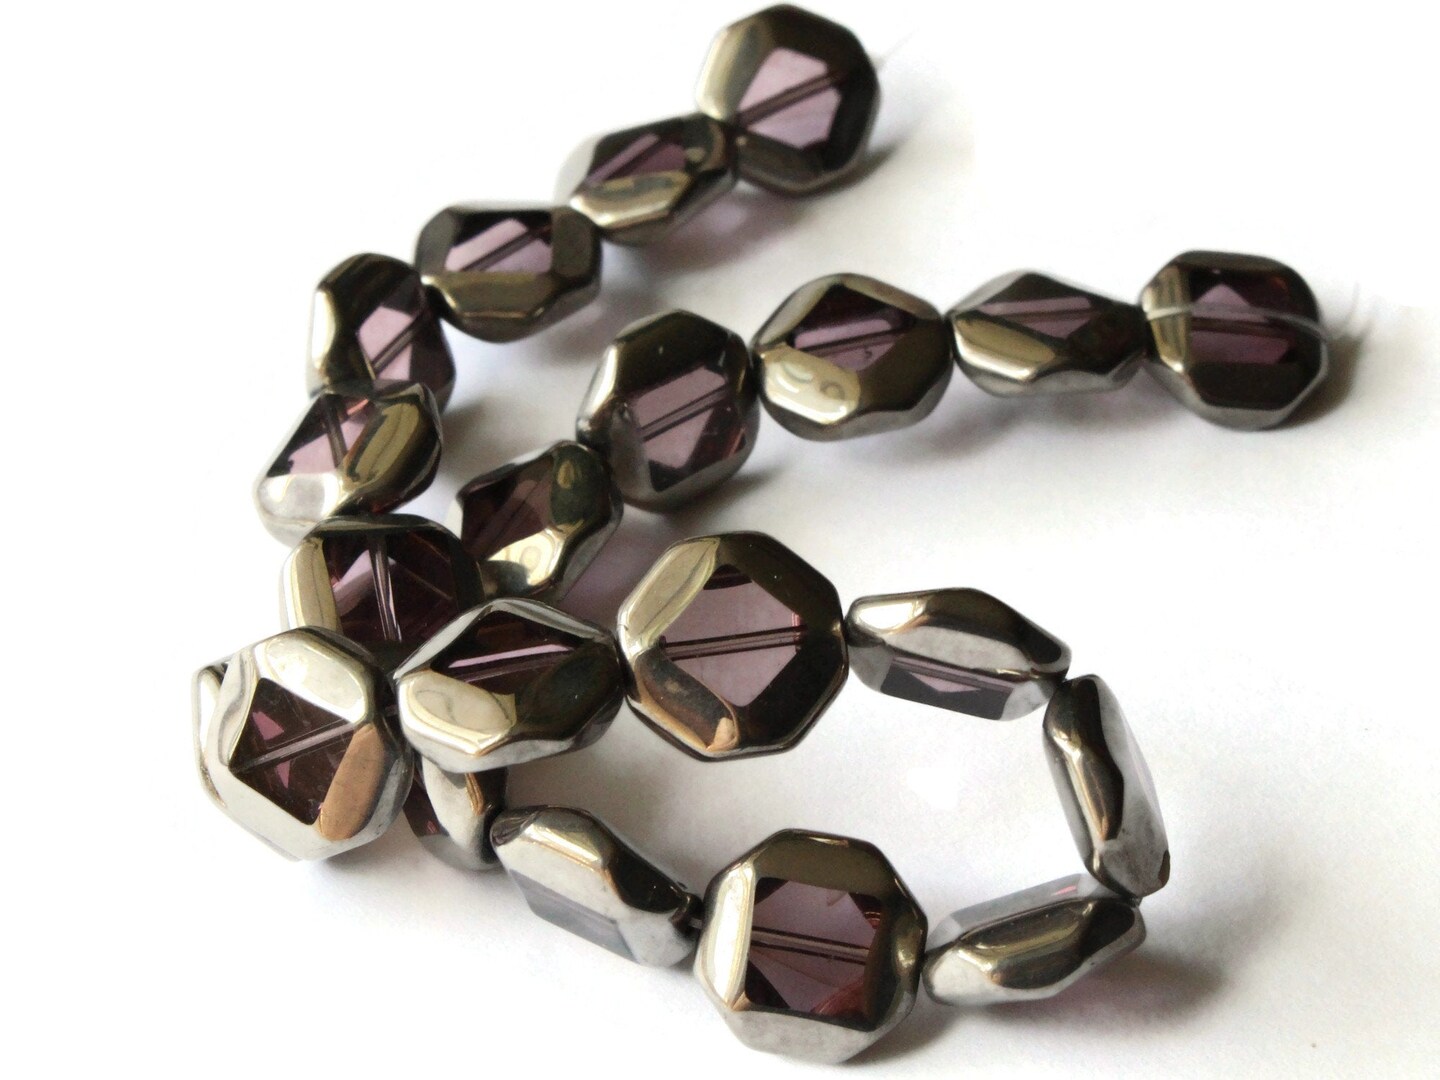 22 14mm Silver Rimmed Glass Beads Pink Octagon Window Beads